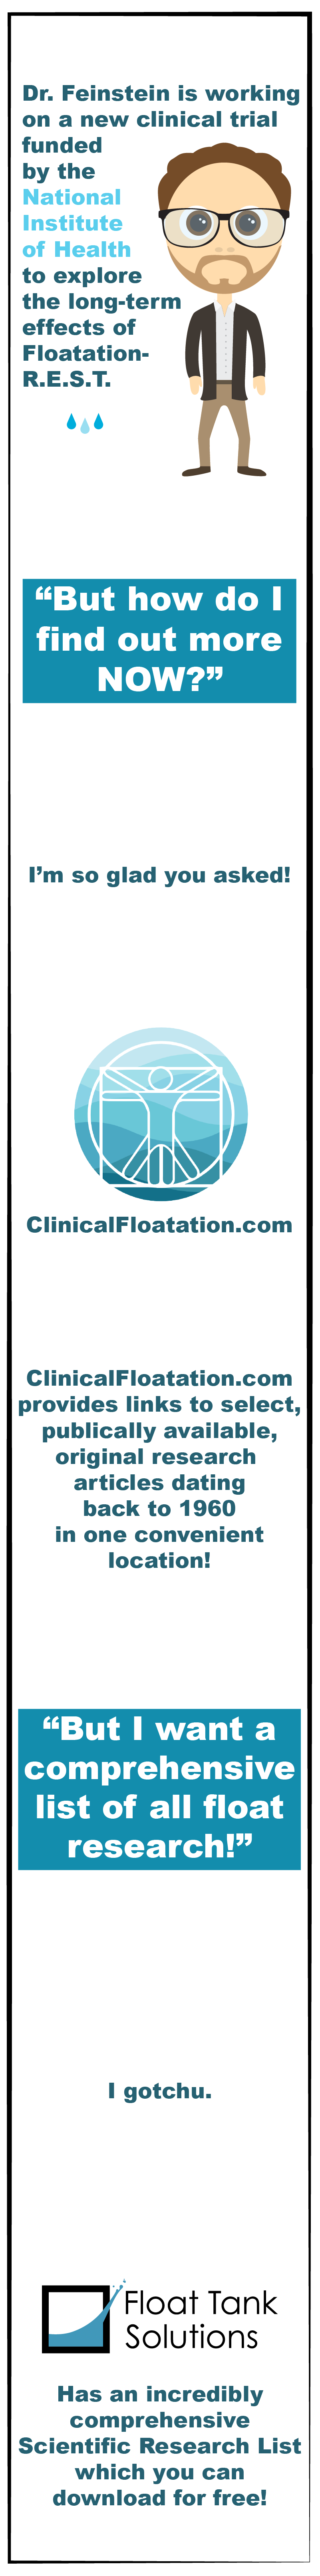 Dr. Feinstein is working on a new clinical trial funded by NIH. Find out more at clinicalfloatation.com